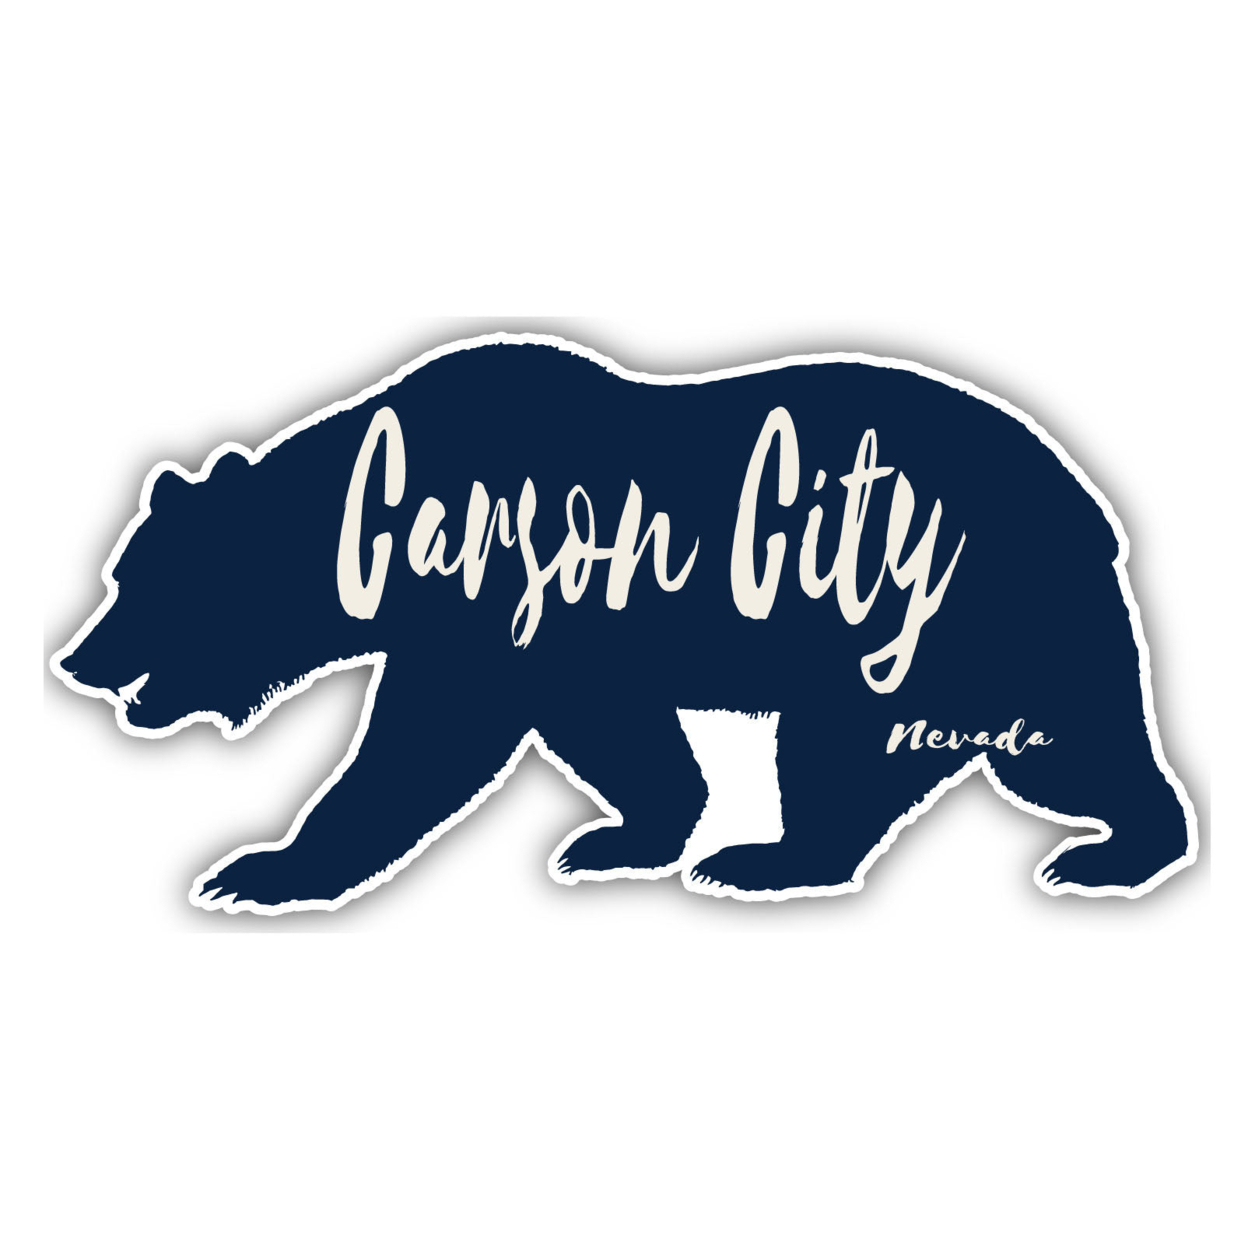 Carson City Nevada Souvenir Decorative Stickers (Choose Theme And Size) - 4-Pack, 12-Inch, Tent